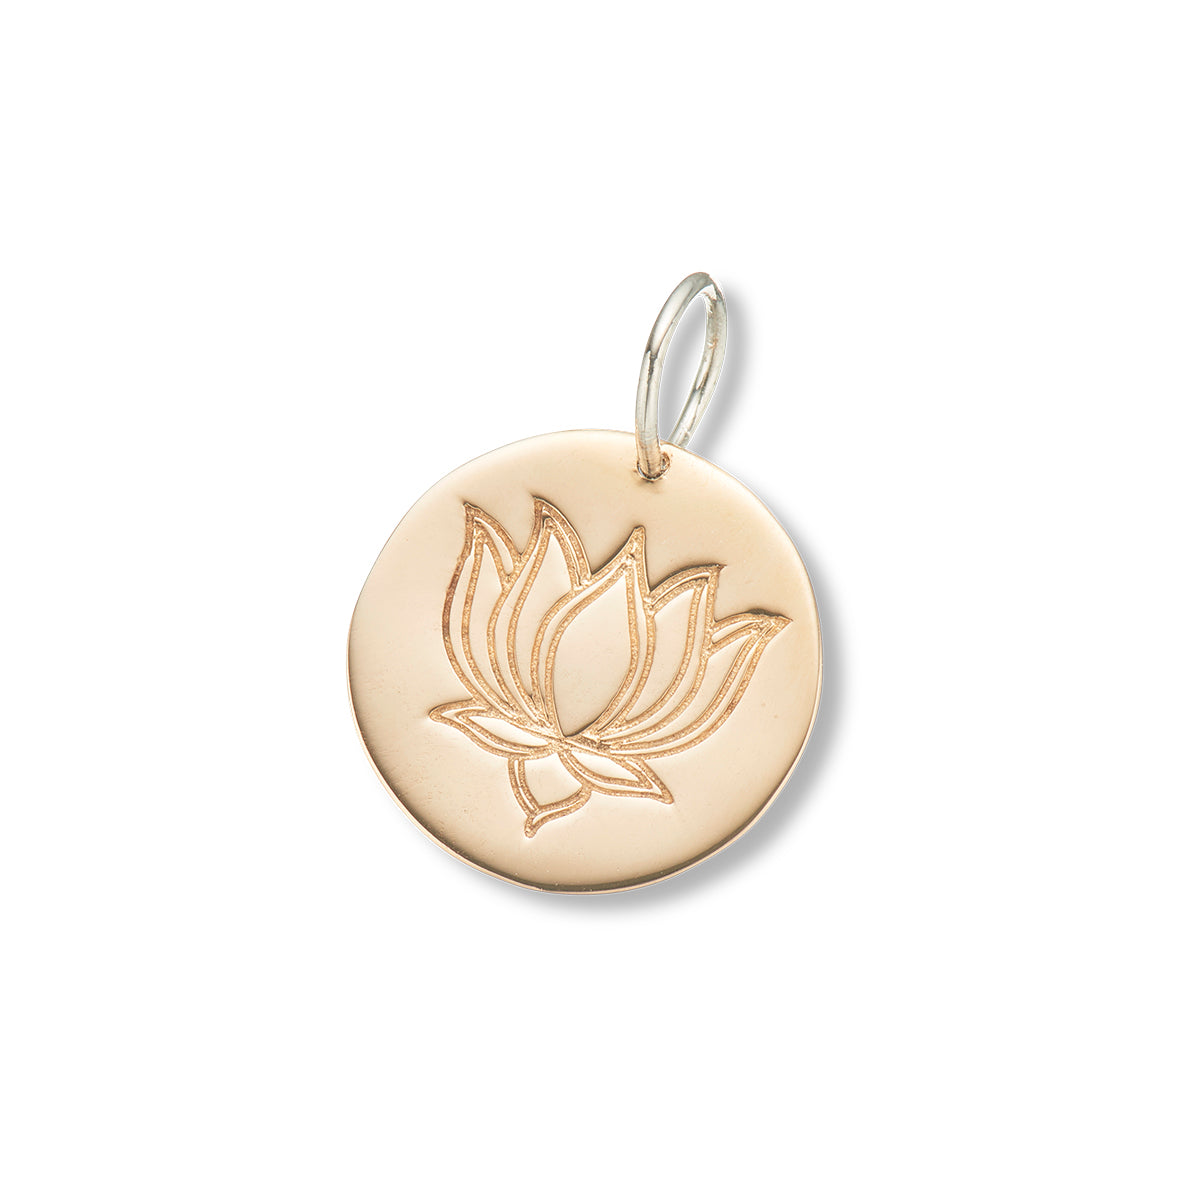 Lotus purity of heart and mind charm